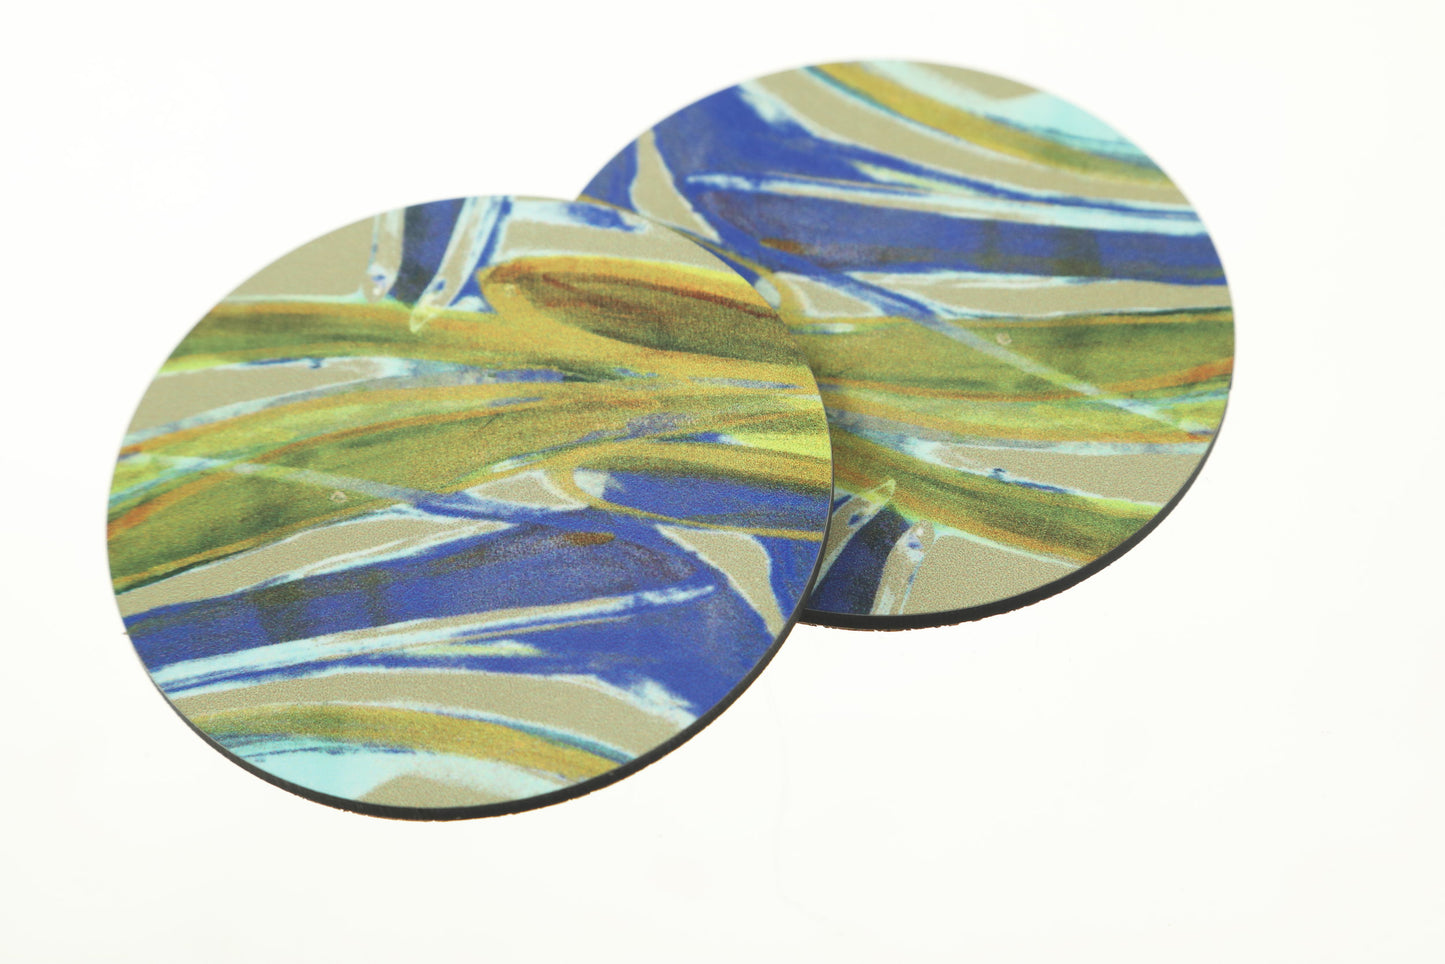 Set of 8 coasters "The Avocado Collection"